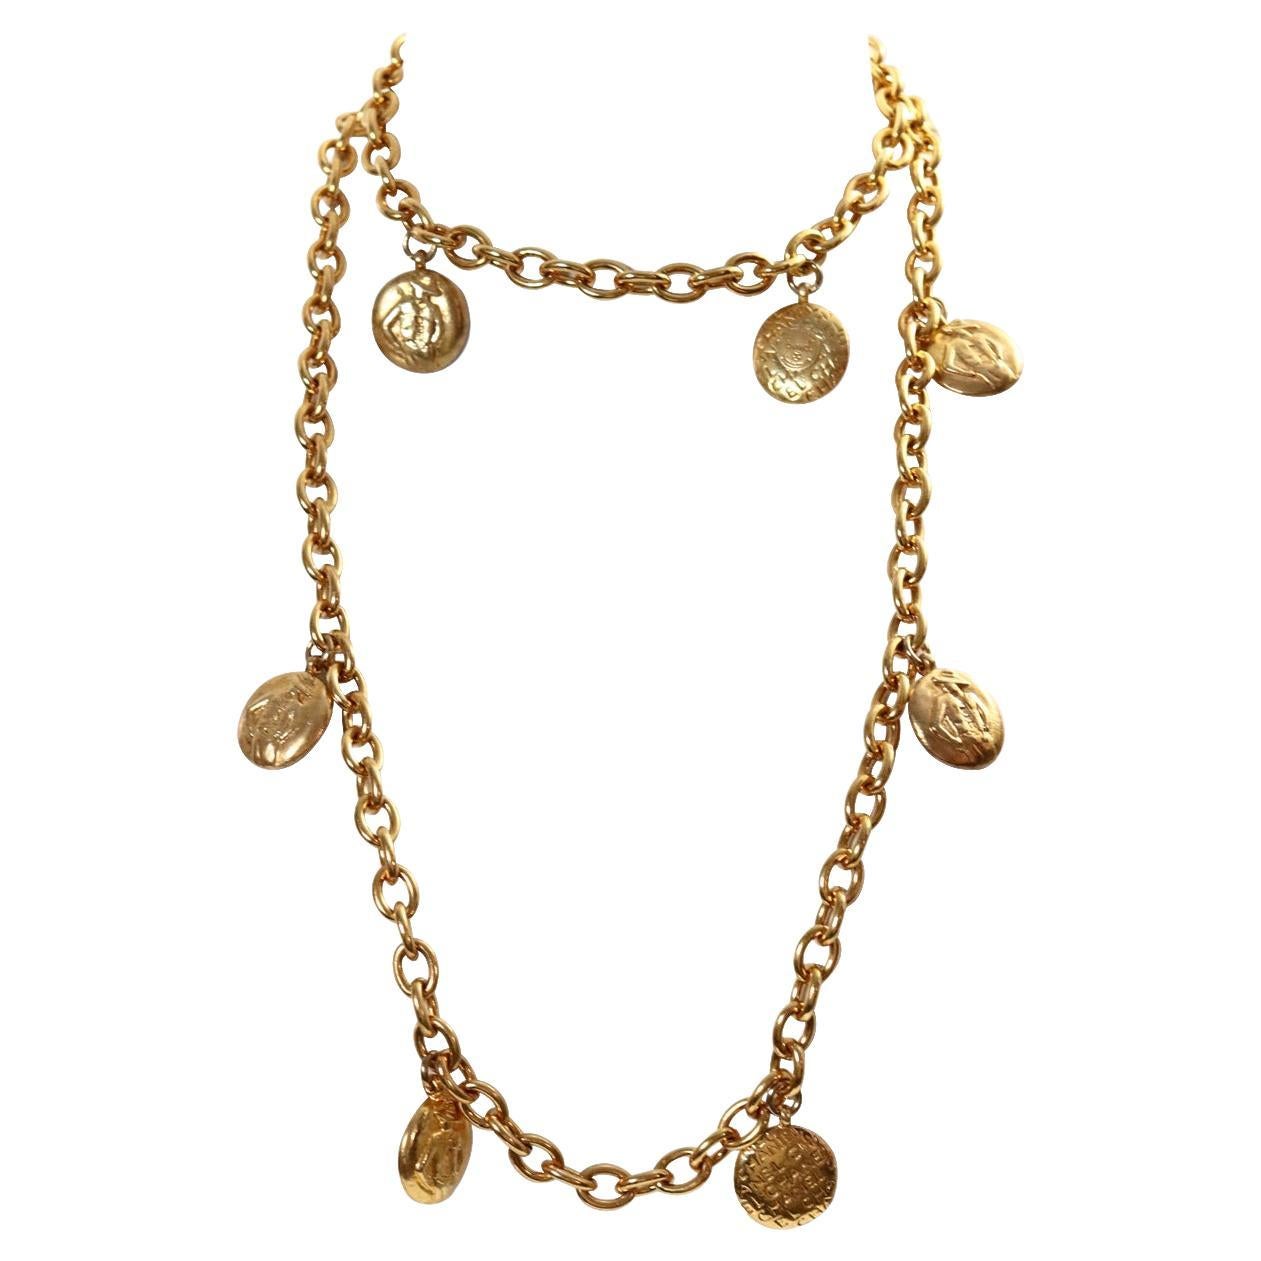 Vintage Chanel Gold Disc Chanel and Coco on Long Necklace Circa 1980s